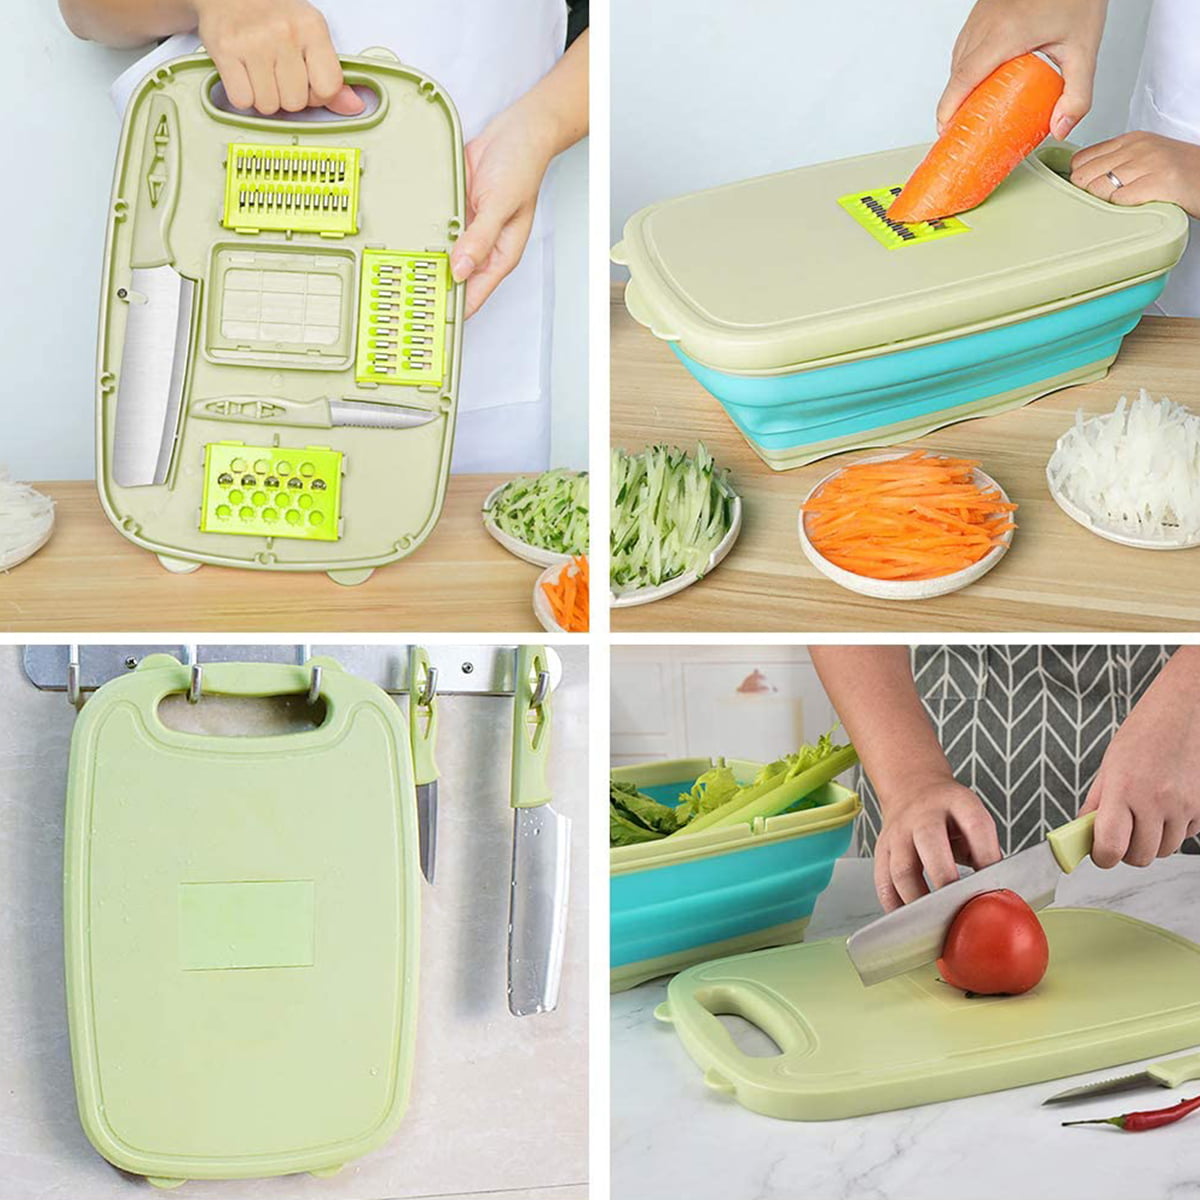 AquaPure – Fruit and Vegetable Washing Basket, Foldable Chopping Board with Draining Plug, Collapsible Cutting Board, Kitchen Essentials, Washing Sili